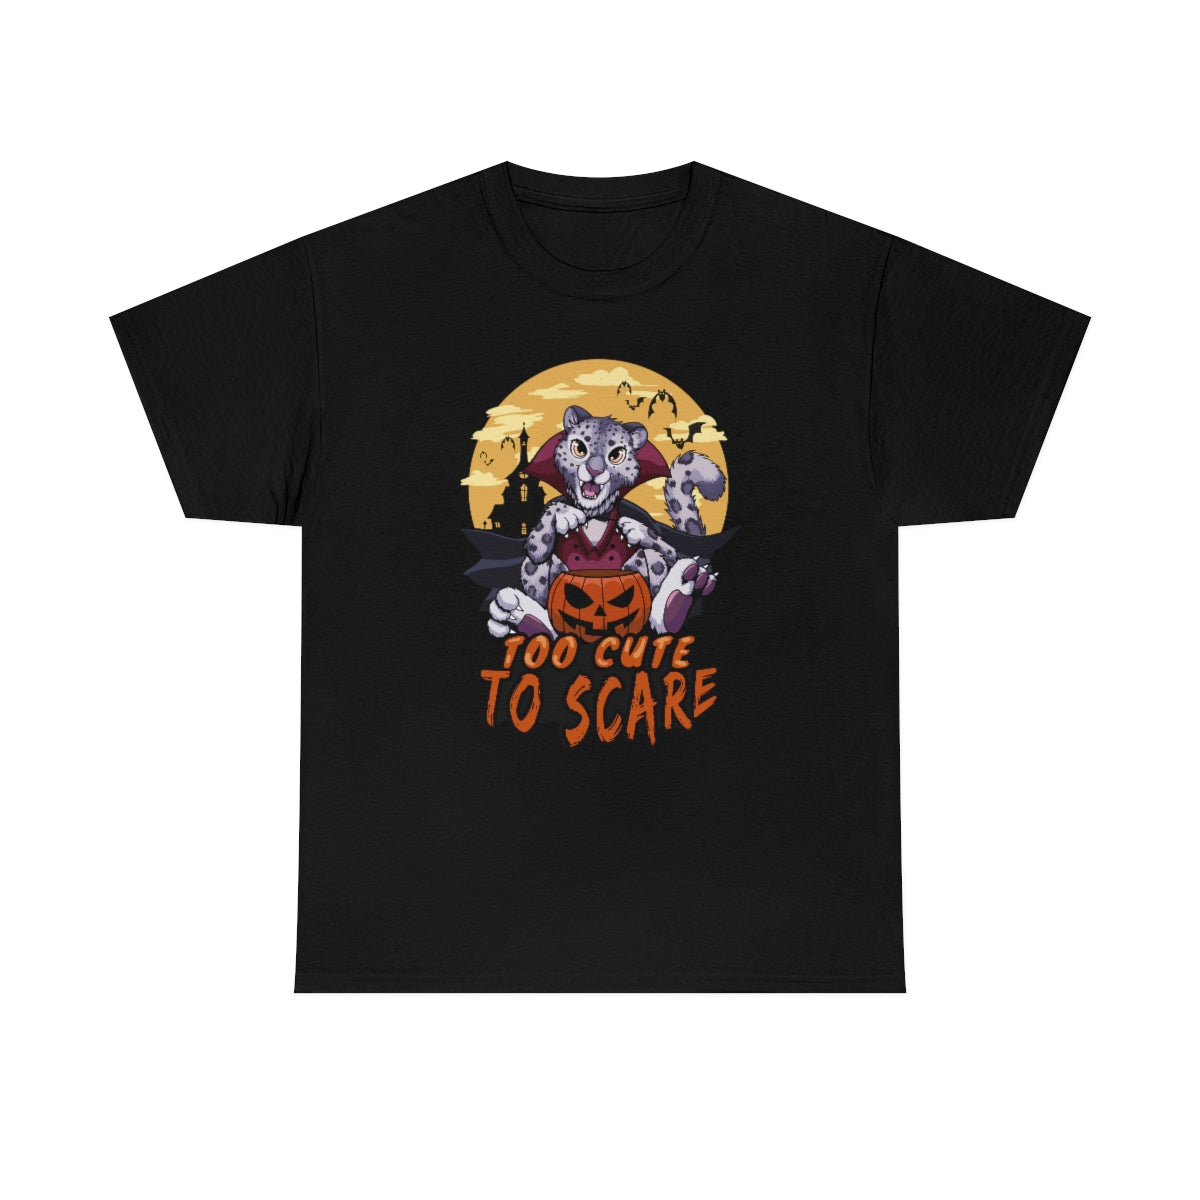 Too Cute to Scare - T-Shirt T-Shirt Artworktee Black S 